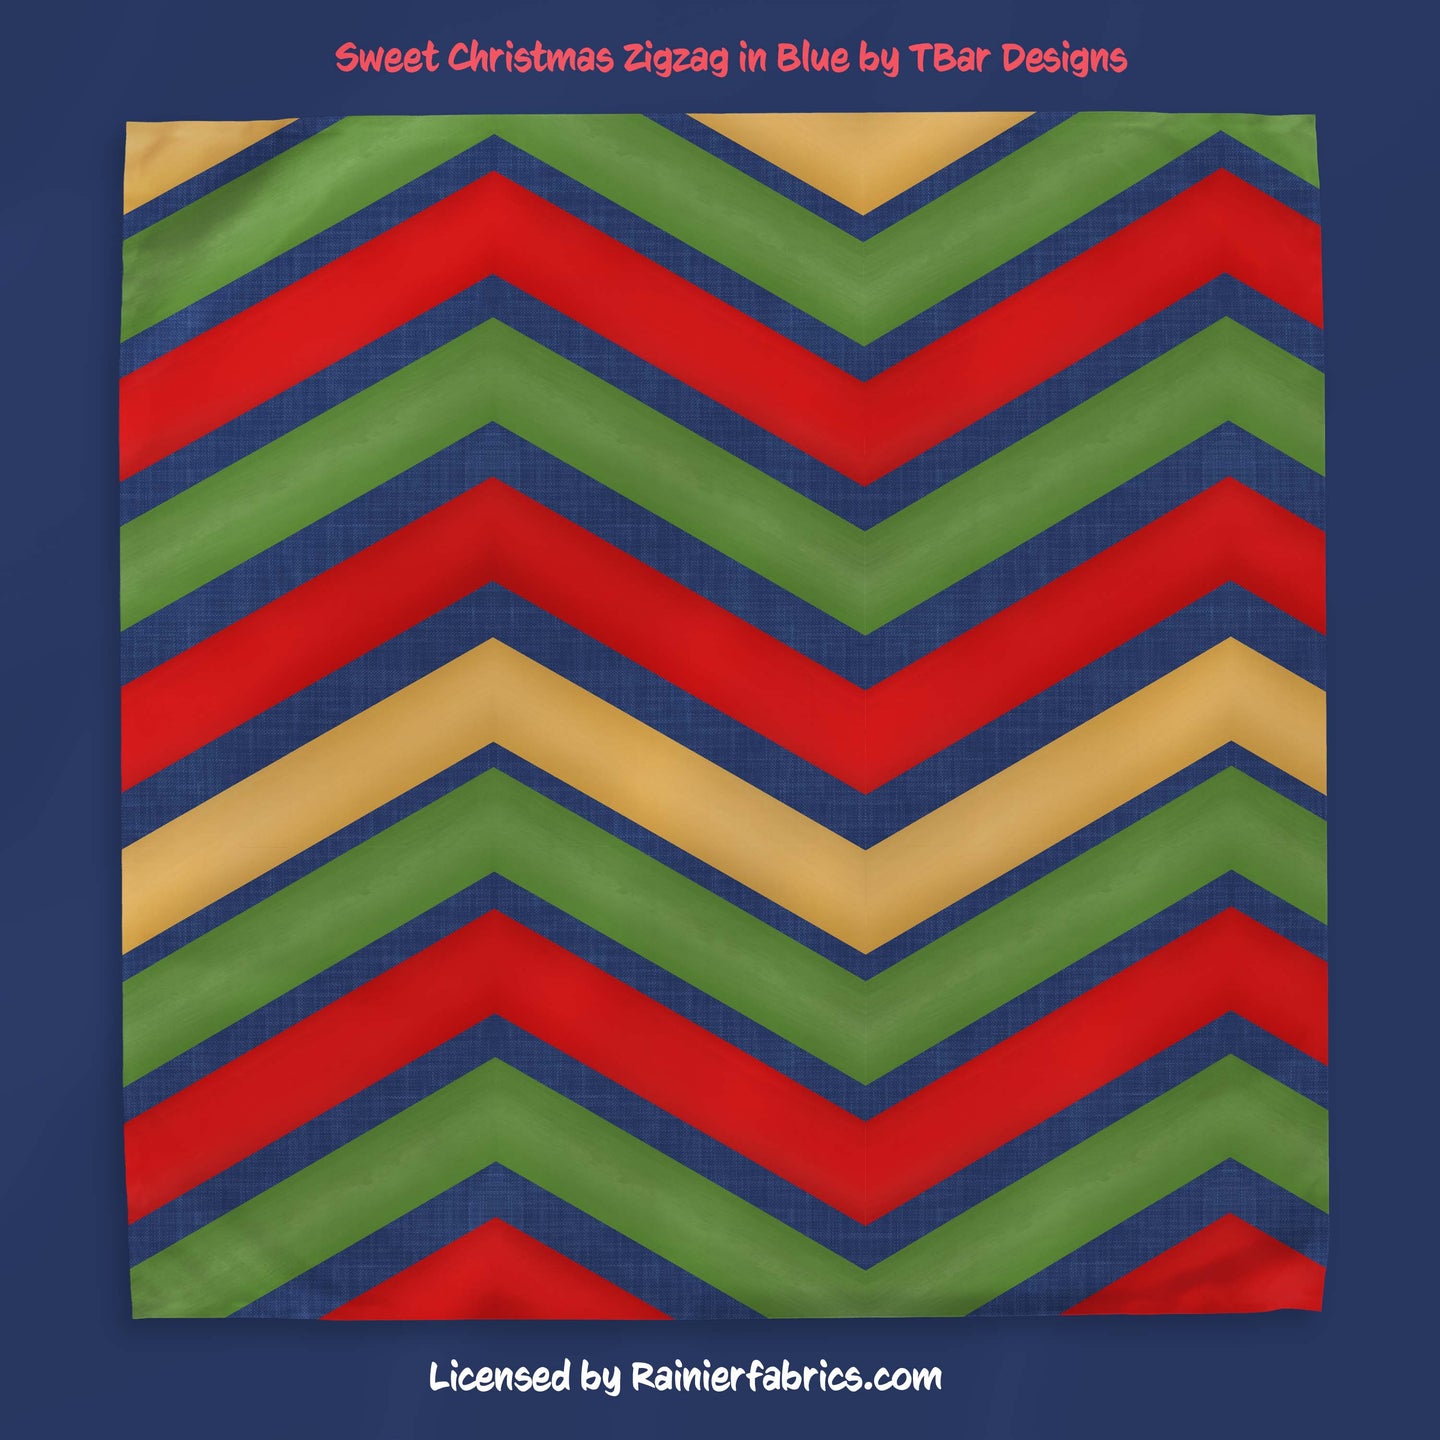 Sweet Christmas Zigzag in Blue by TBar Designs - TAT 2-5 Days (Turn around time) - Order by 1/2 yard; Description of bases below